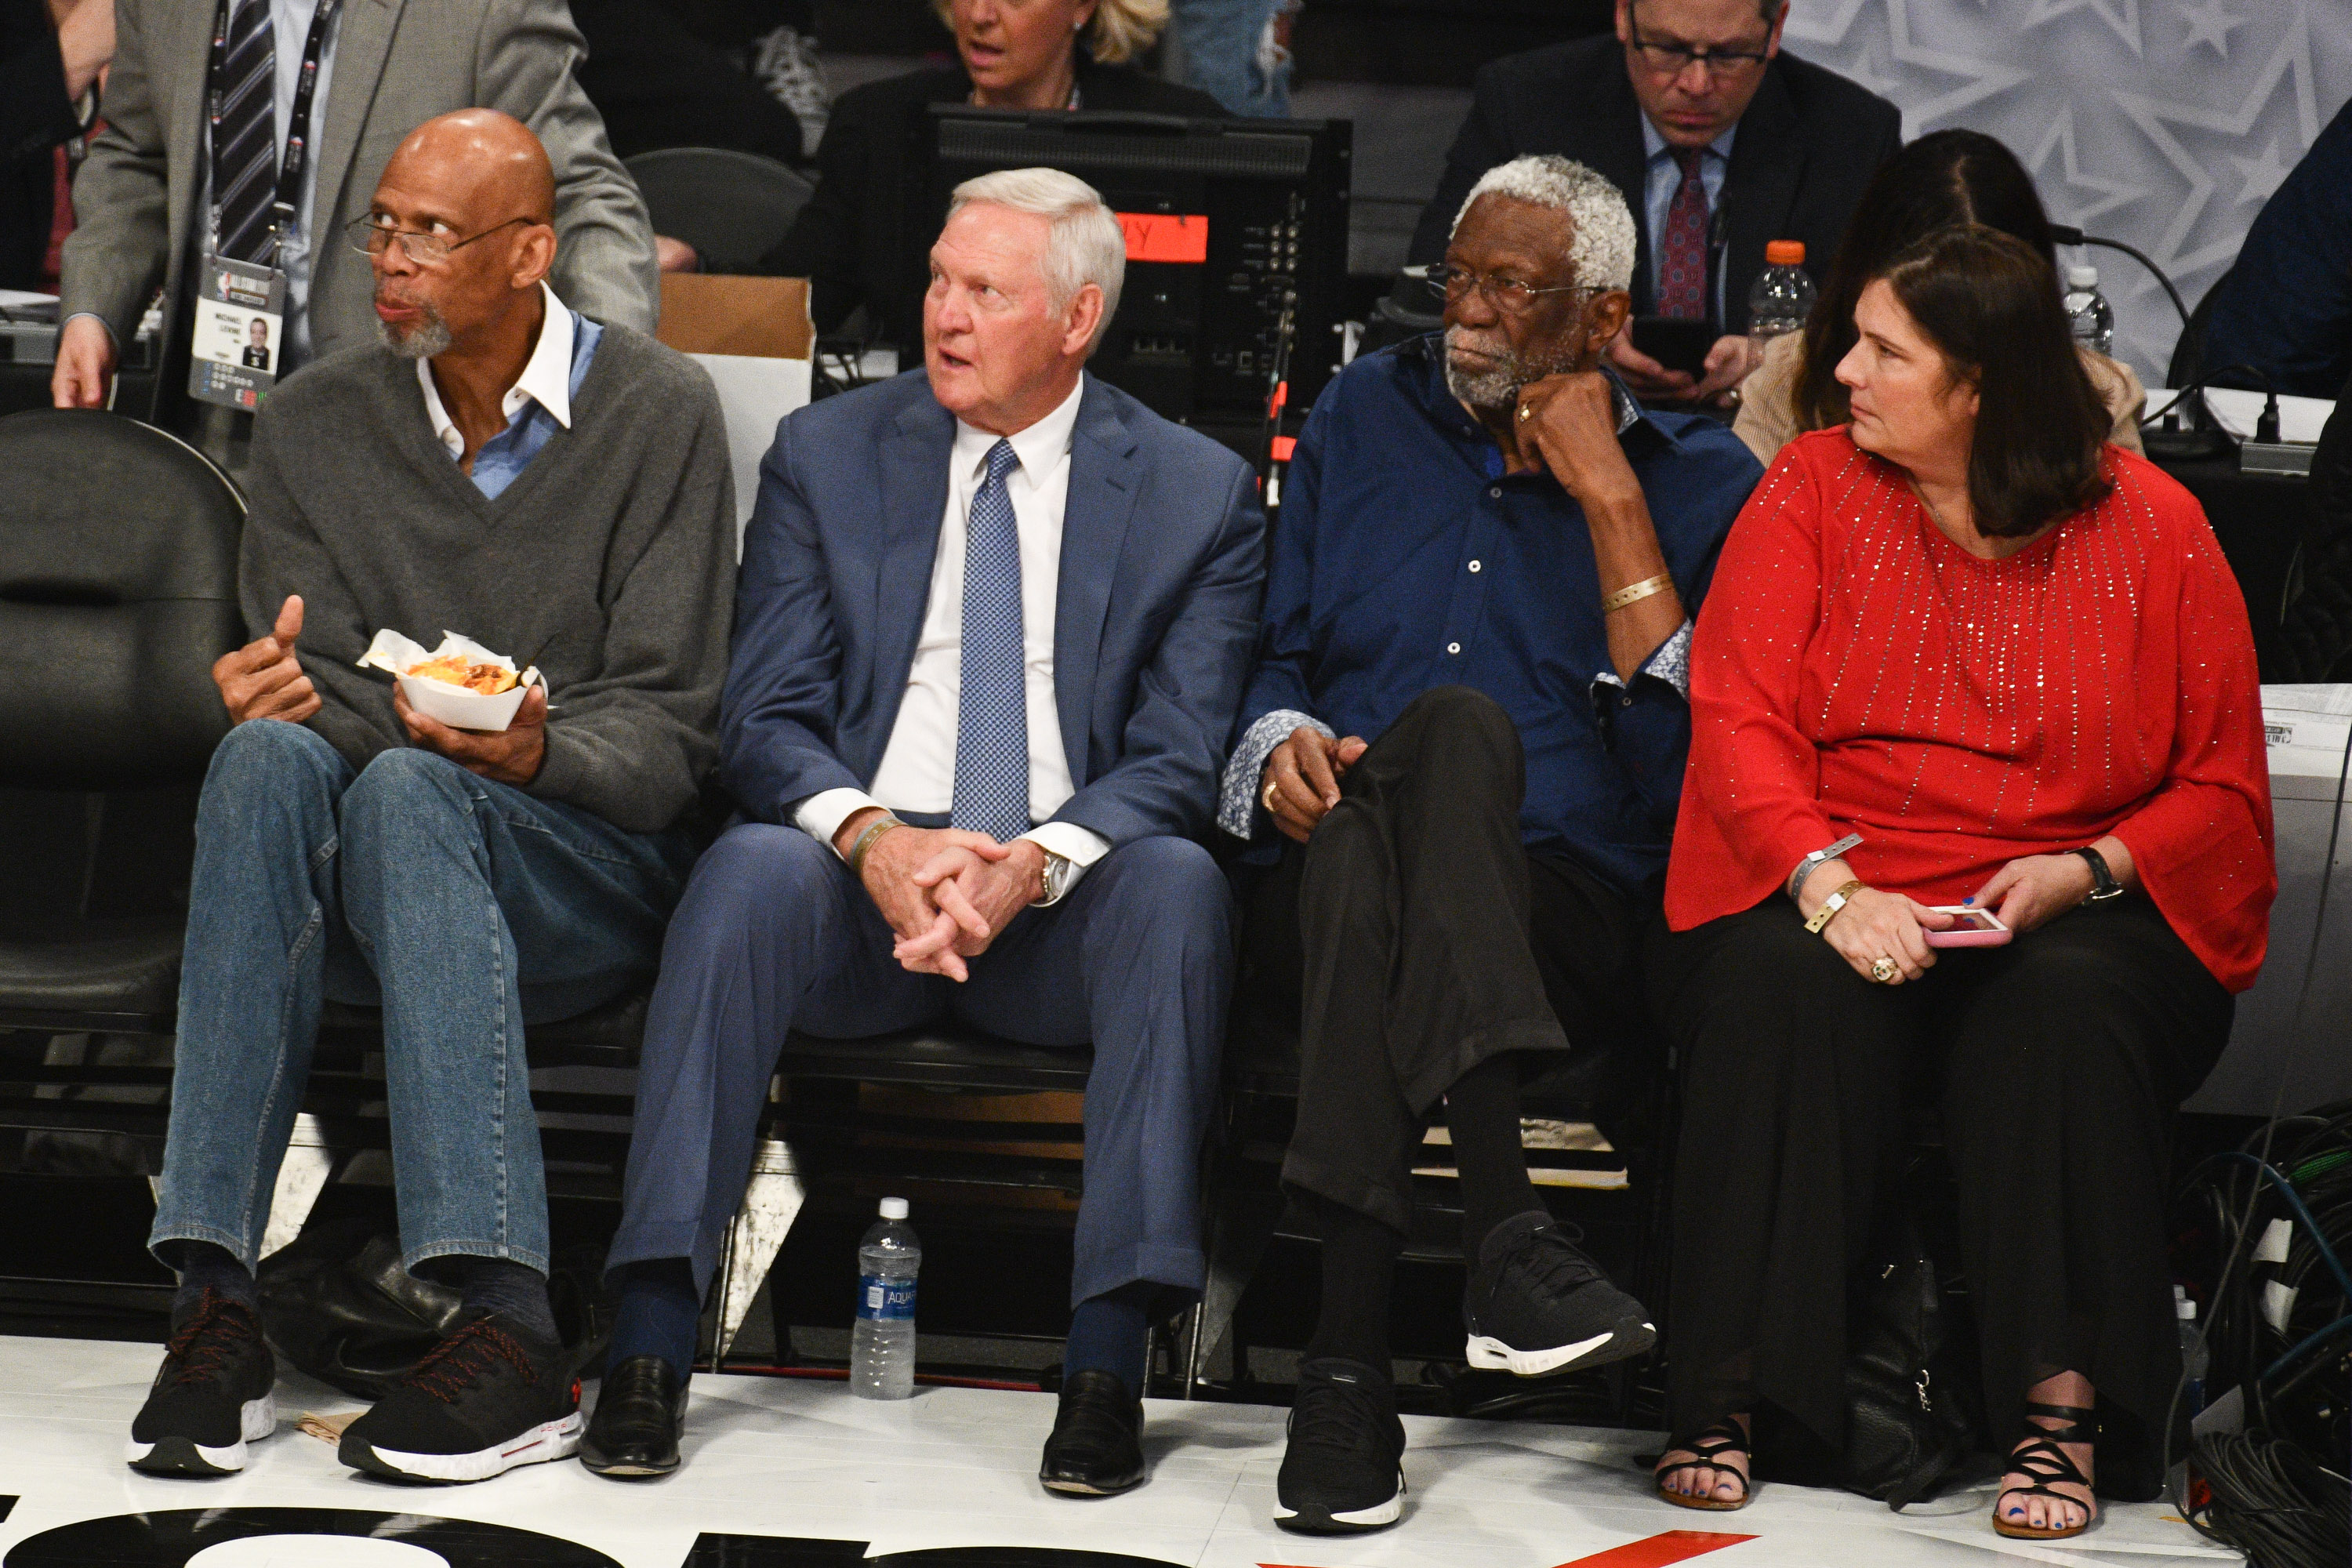 L-R: Former Los Angeles Lakers greats Kareem Abdul-Jabbar and Jerry West and Boston Celtics legend Bill Russell attend the 2018 NBA All-Star Game